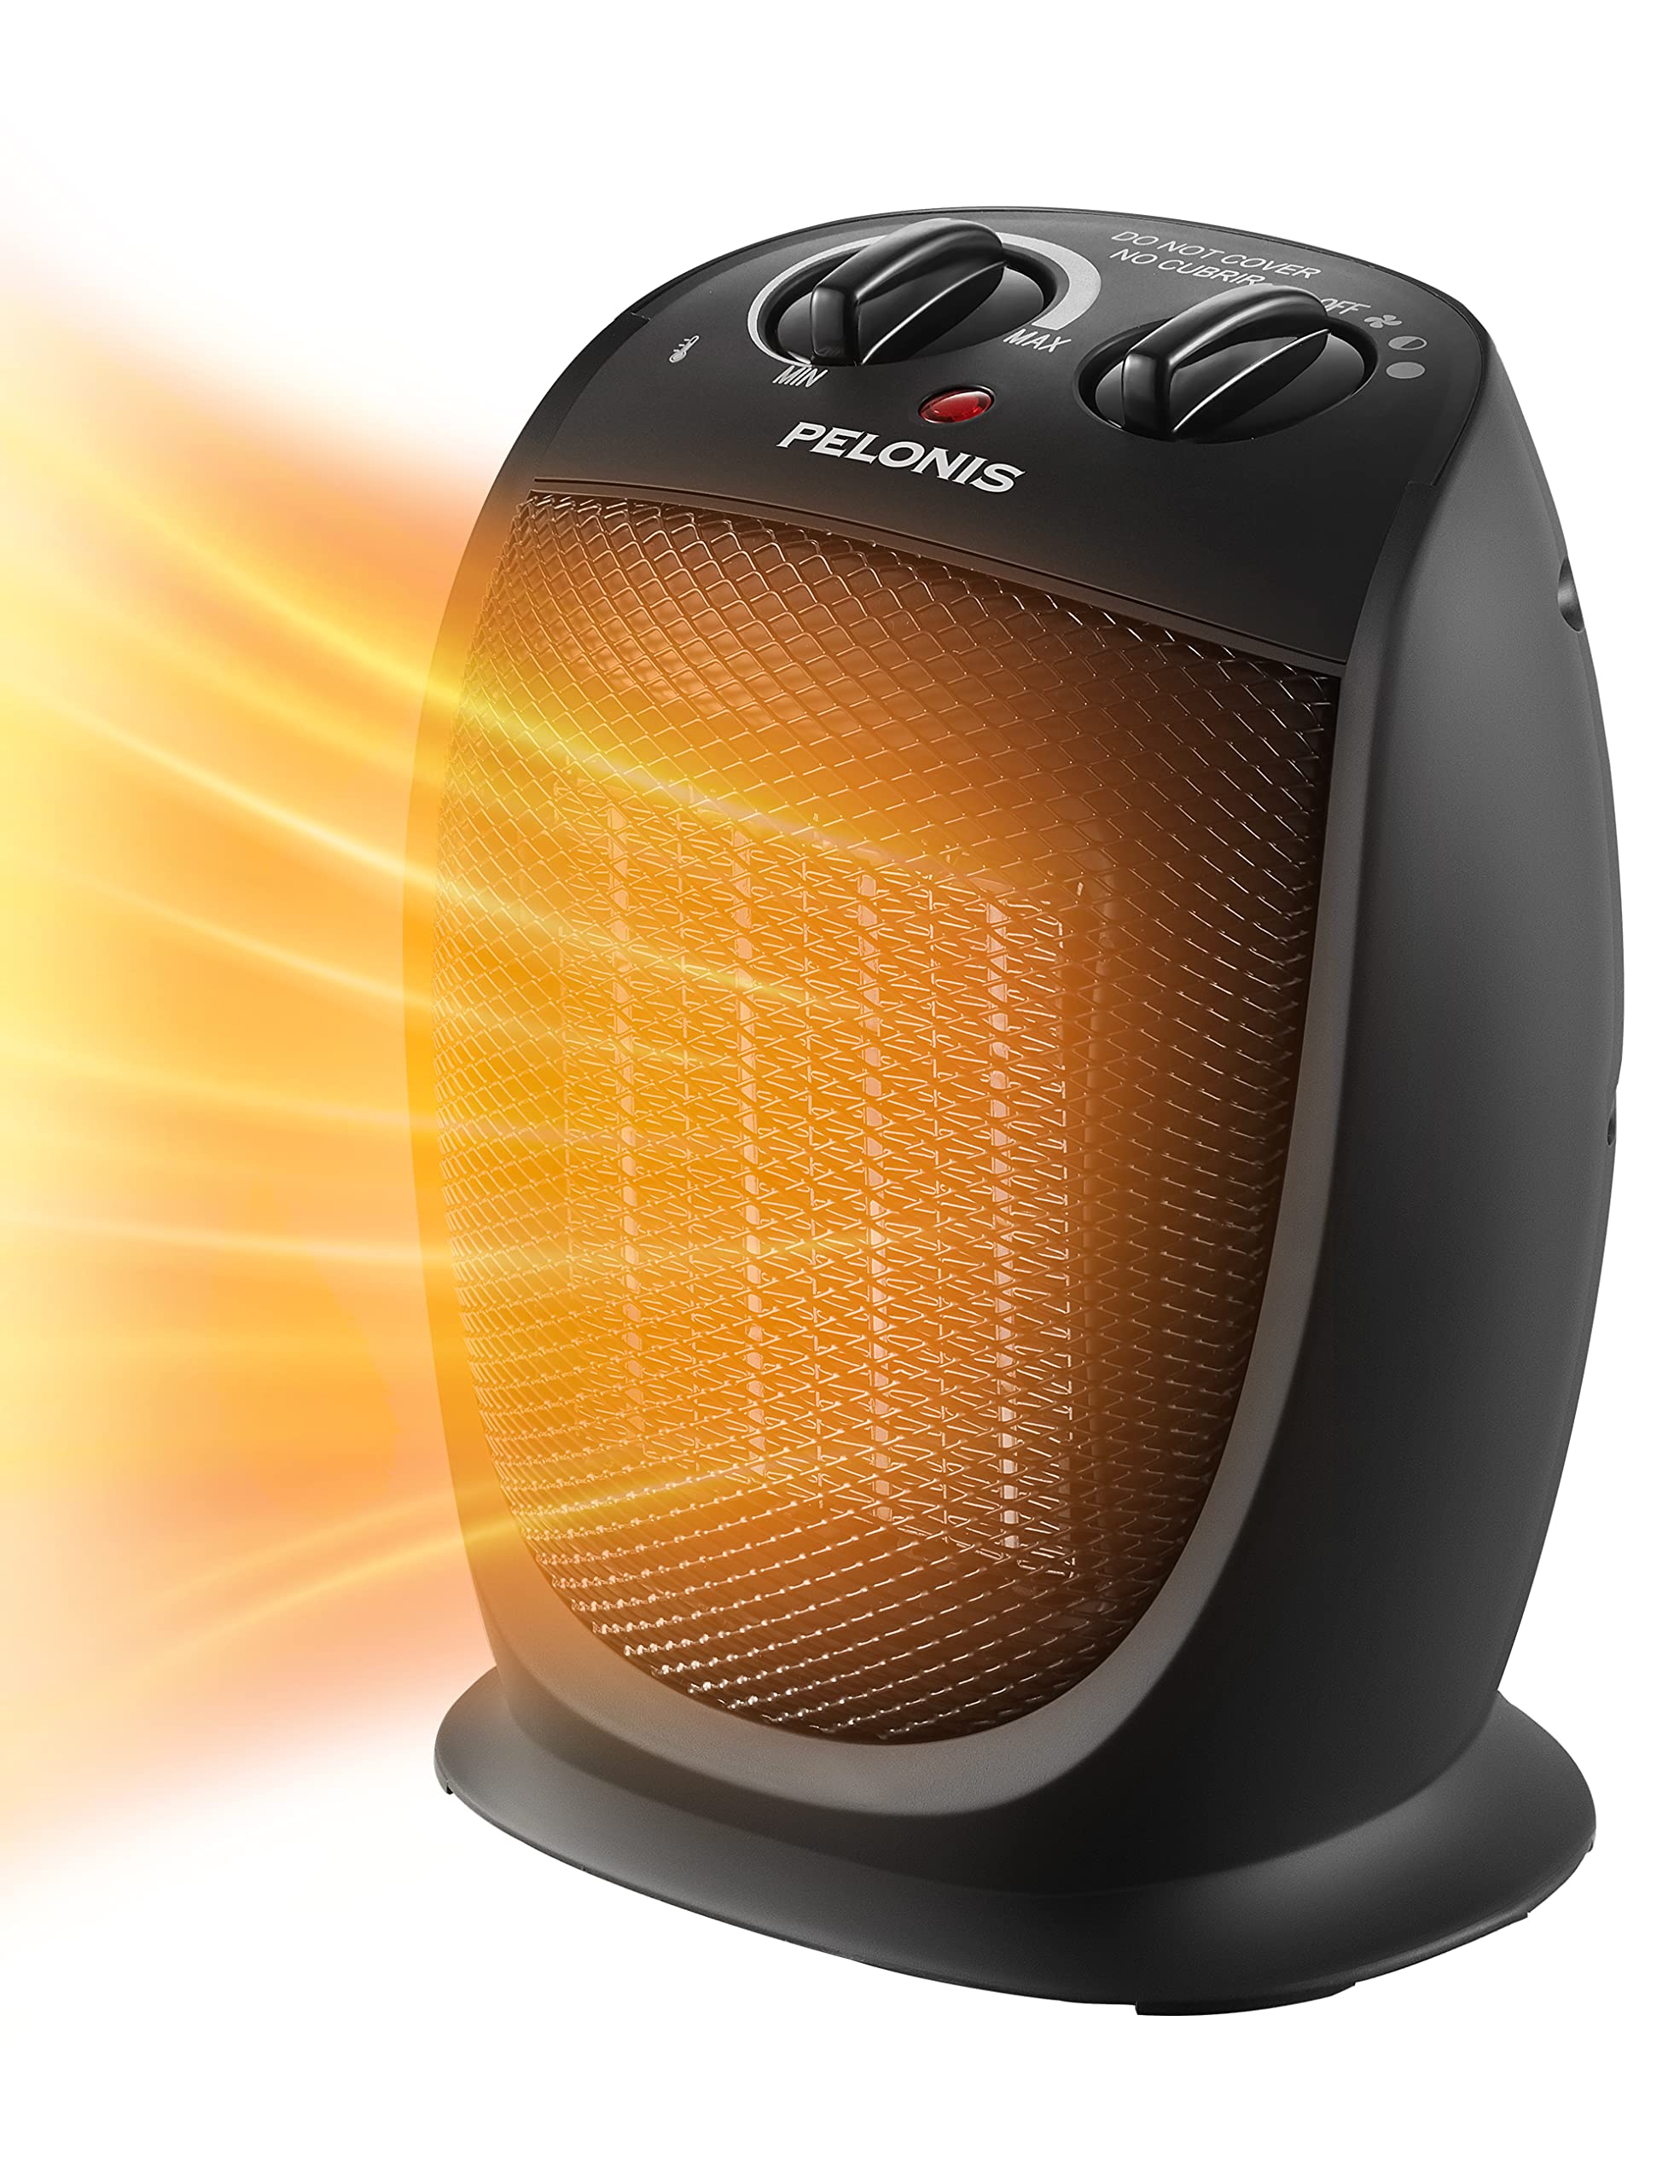 $21.98 PELONIS PHTA1ABB Portable, 1500W/900W, Quiet Cooling & Heating Mode Space Heater for All Season, Tip Over & Overheat Protection, Black , 9inch